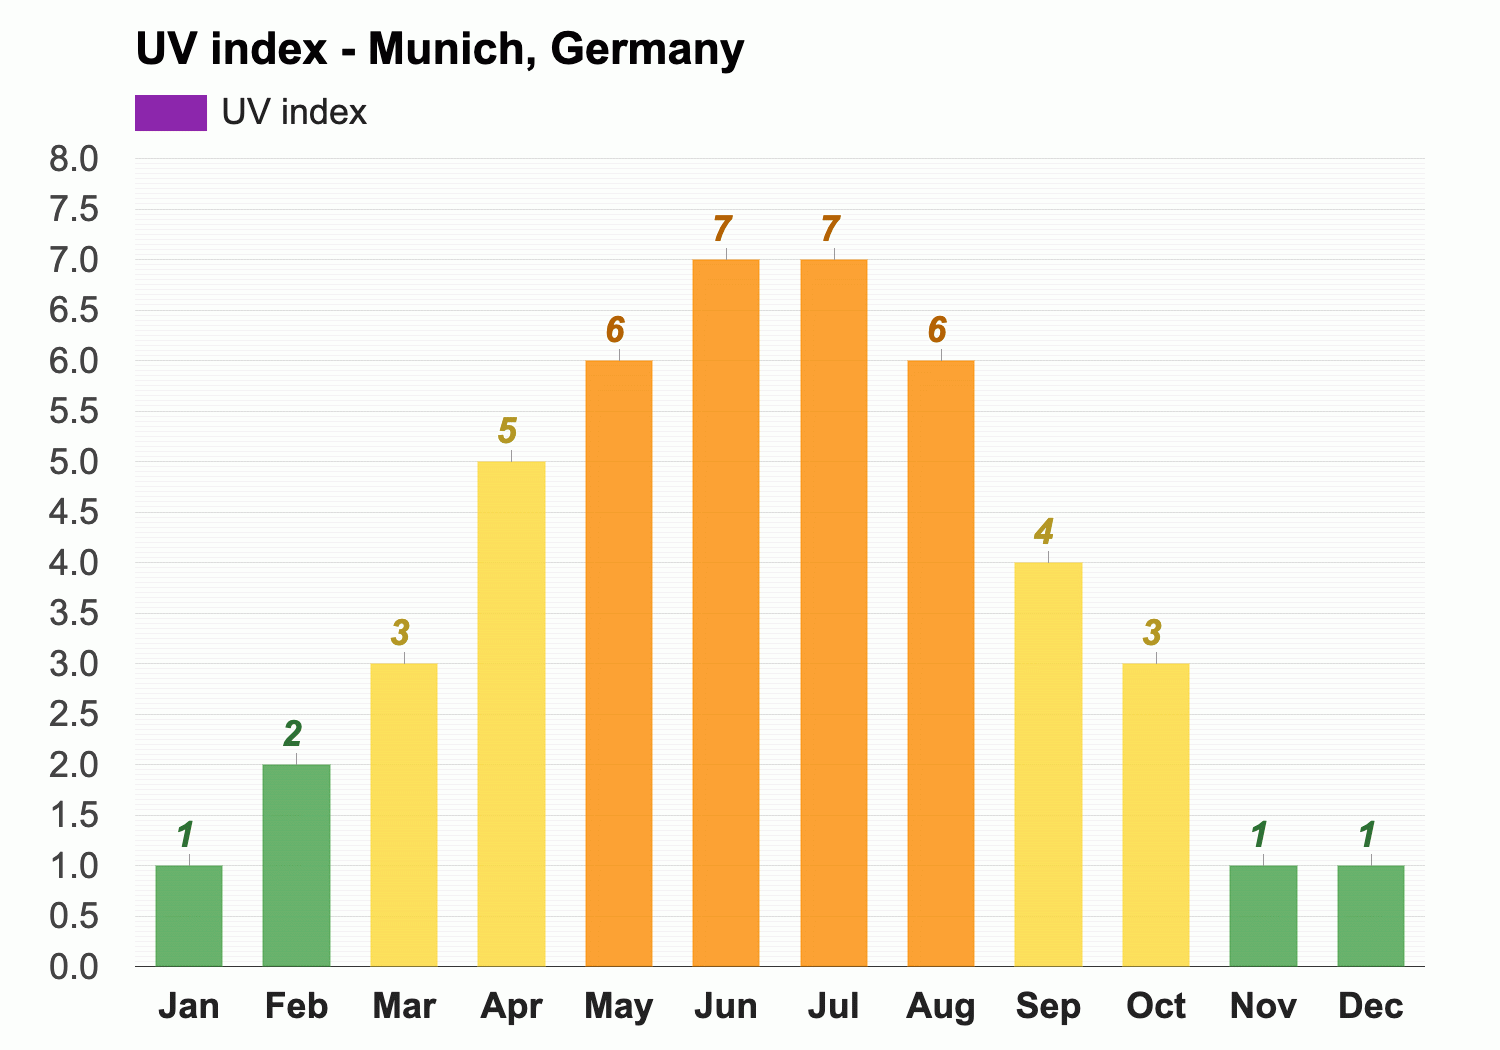 Munich, Germany - September weather forecast and climate information |  Weather Atlas